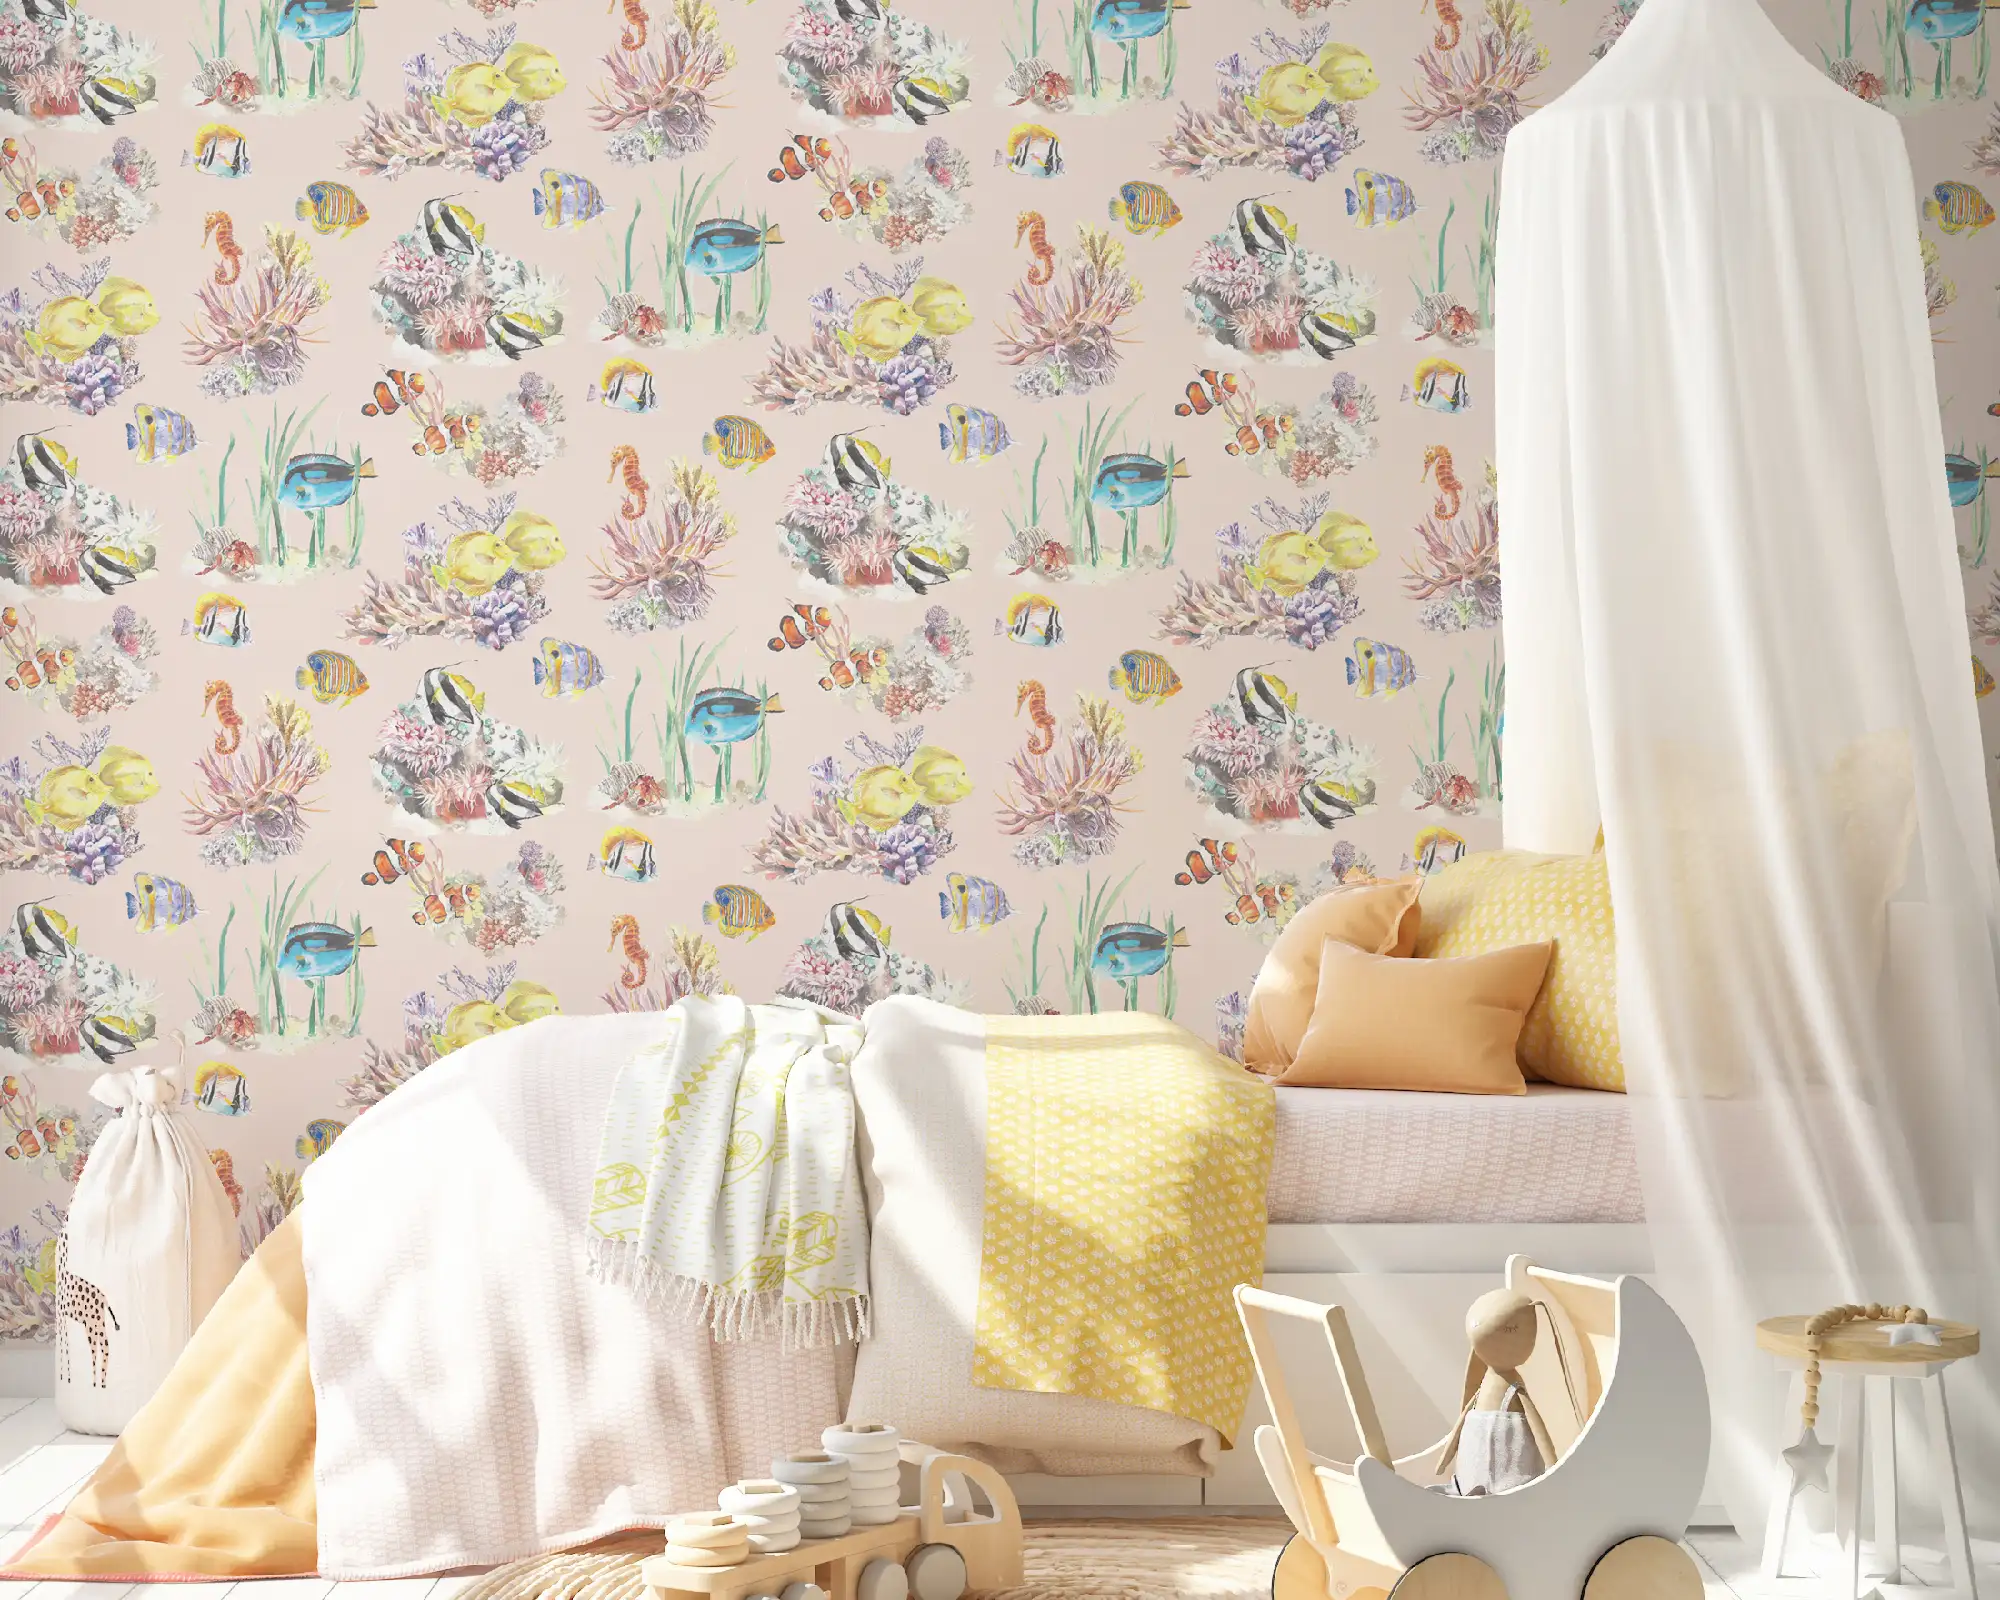 Coral Reef Wallpaper in Blush2